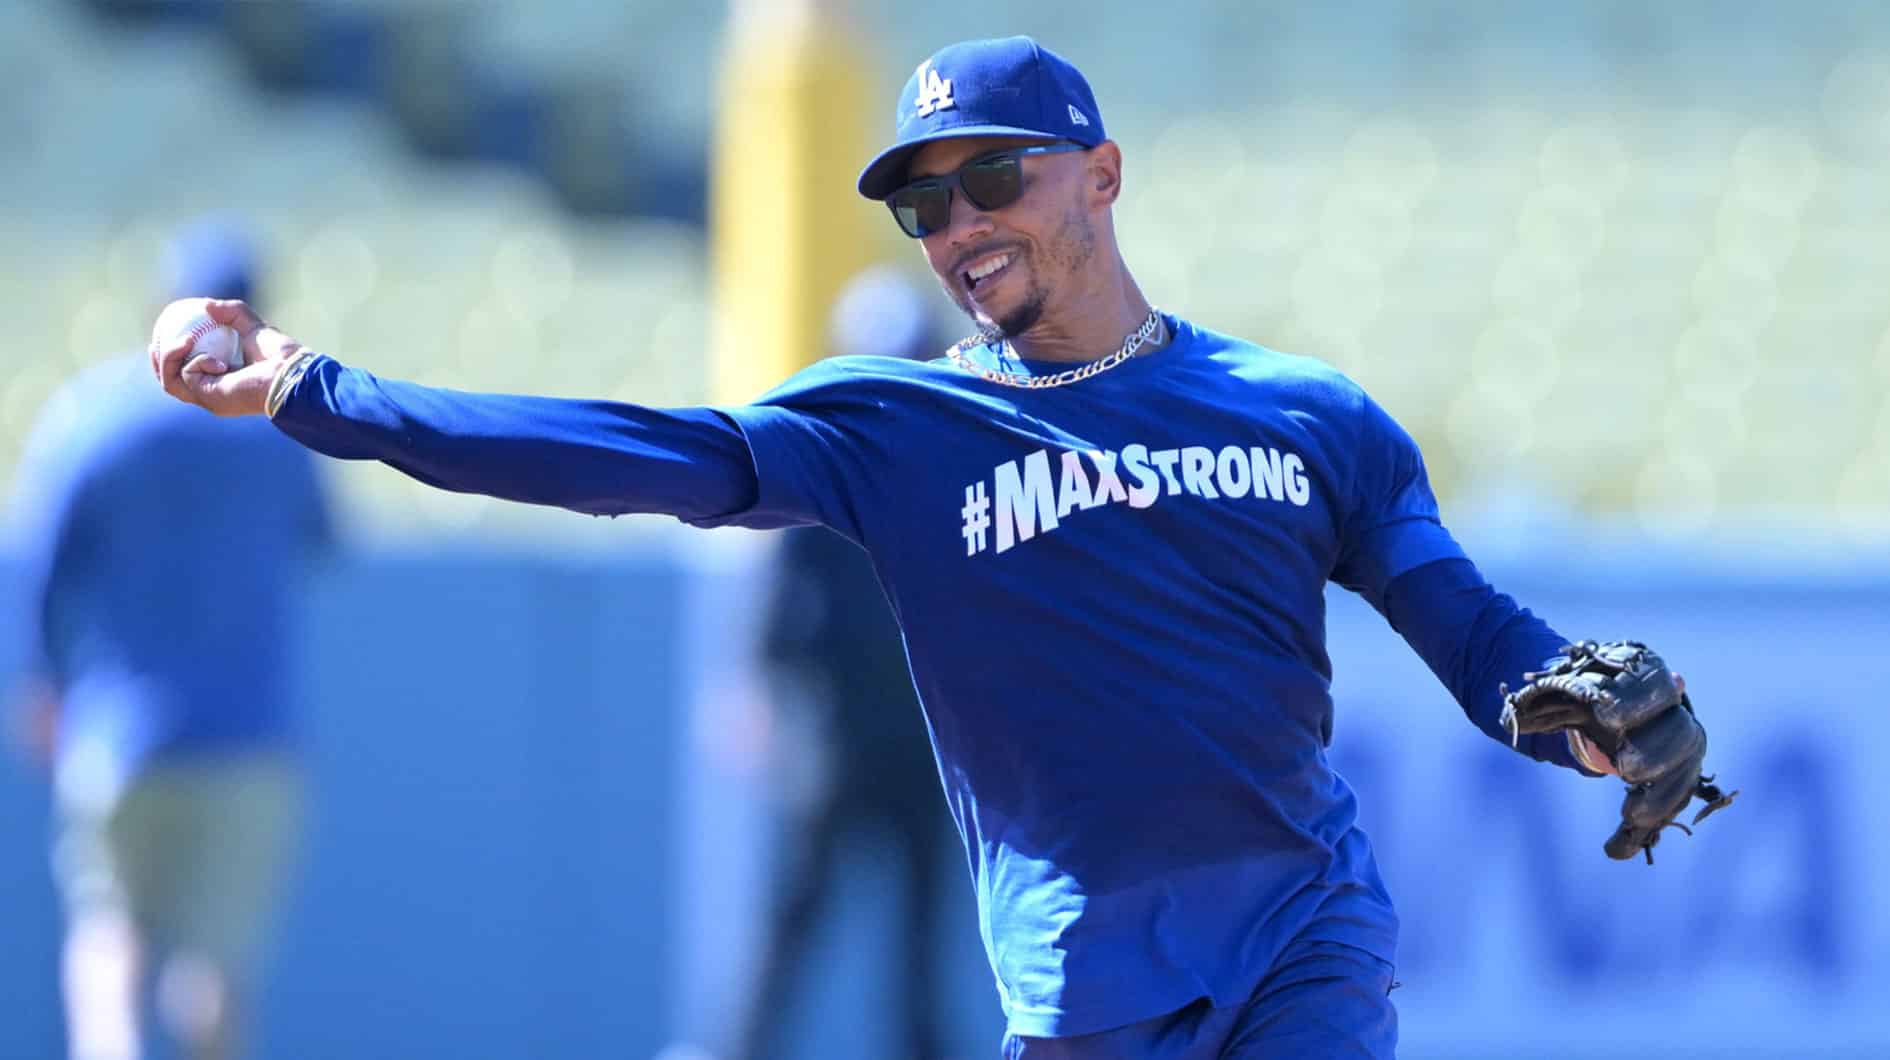 Los Angeles Dodgers second baseman Mookie Betts (50) fields ground balls prior to the game against the Philadelphia Phillies at Dodger Stadium. Dodger players wore #MaxStrong shirts during pregame to honor Max, the 3-year old son of first baseman Freddie Freeman (5), who was diagnosed with Guillian-Barre syndrome. 